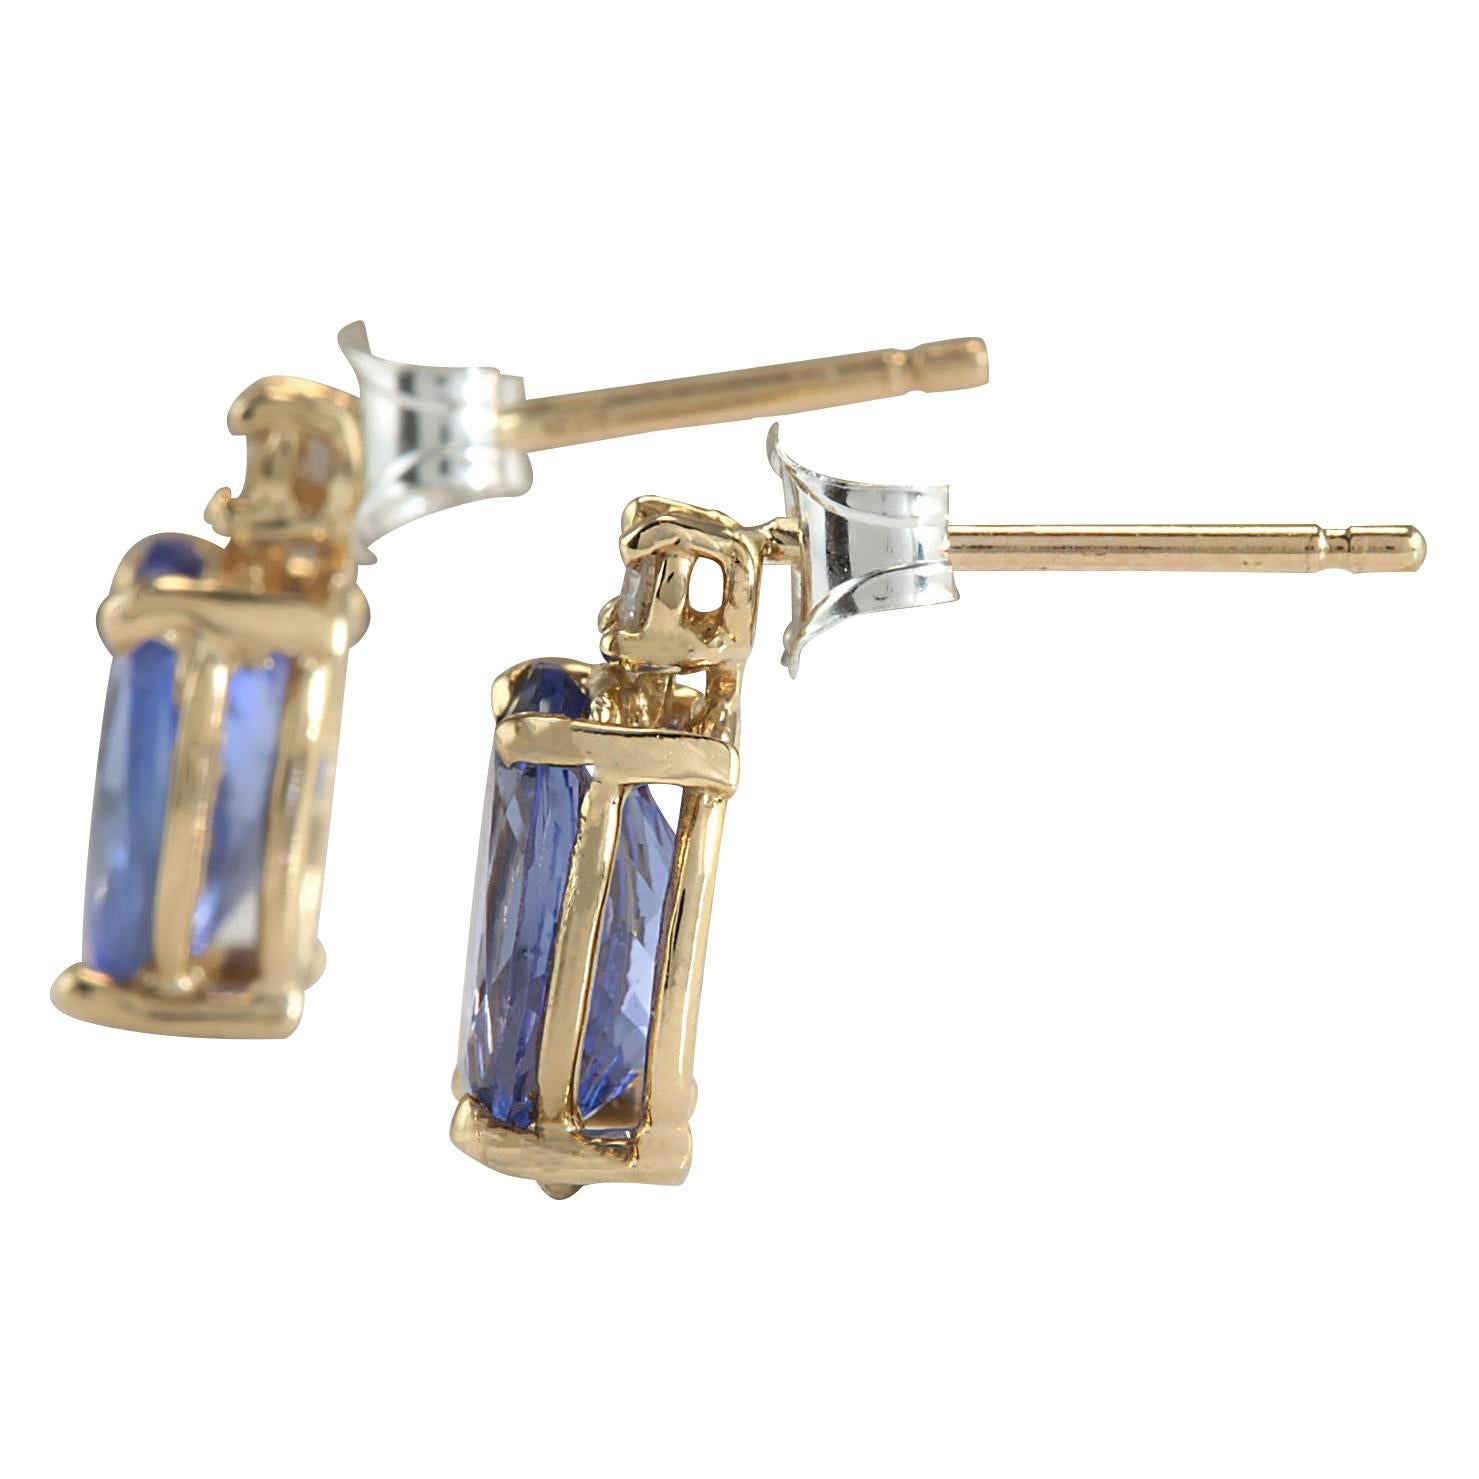 Stamped: 14K Yellow Gold
Total Earrings Weight: 1.4 Grams
Total Natural Tanzanite Weight is 2.33 Carat (Measures: 8.00x6.00 mm)
Color: Blue
Total Natural Diamond Weight is 0.06 Carat
Color: F-G, Clarity: VS2-SI1
Face Measures: 10.75x6.30 mm
Sku: